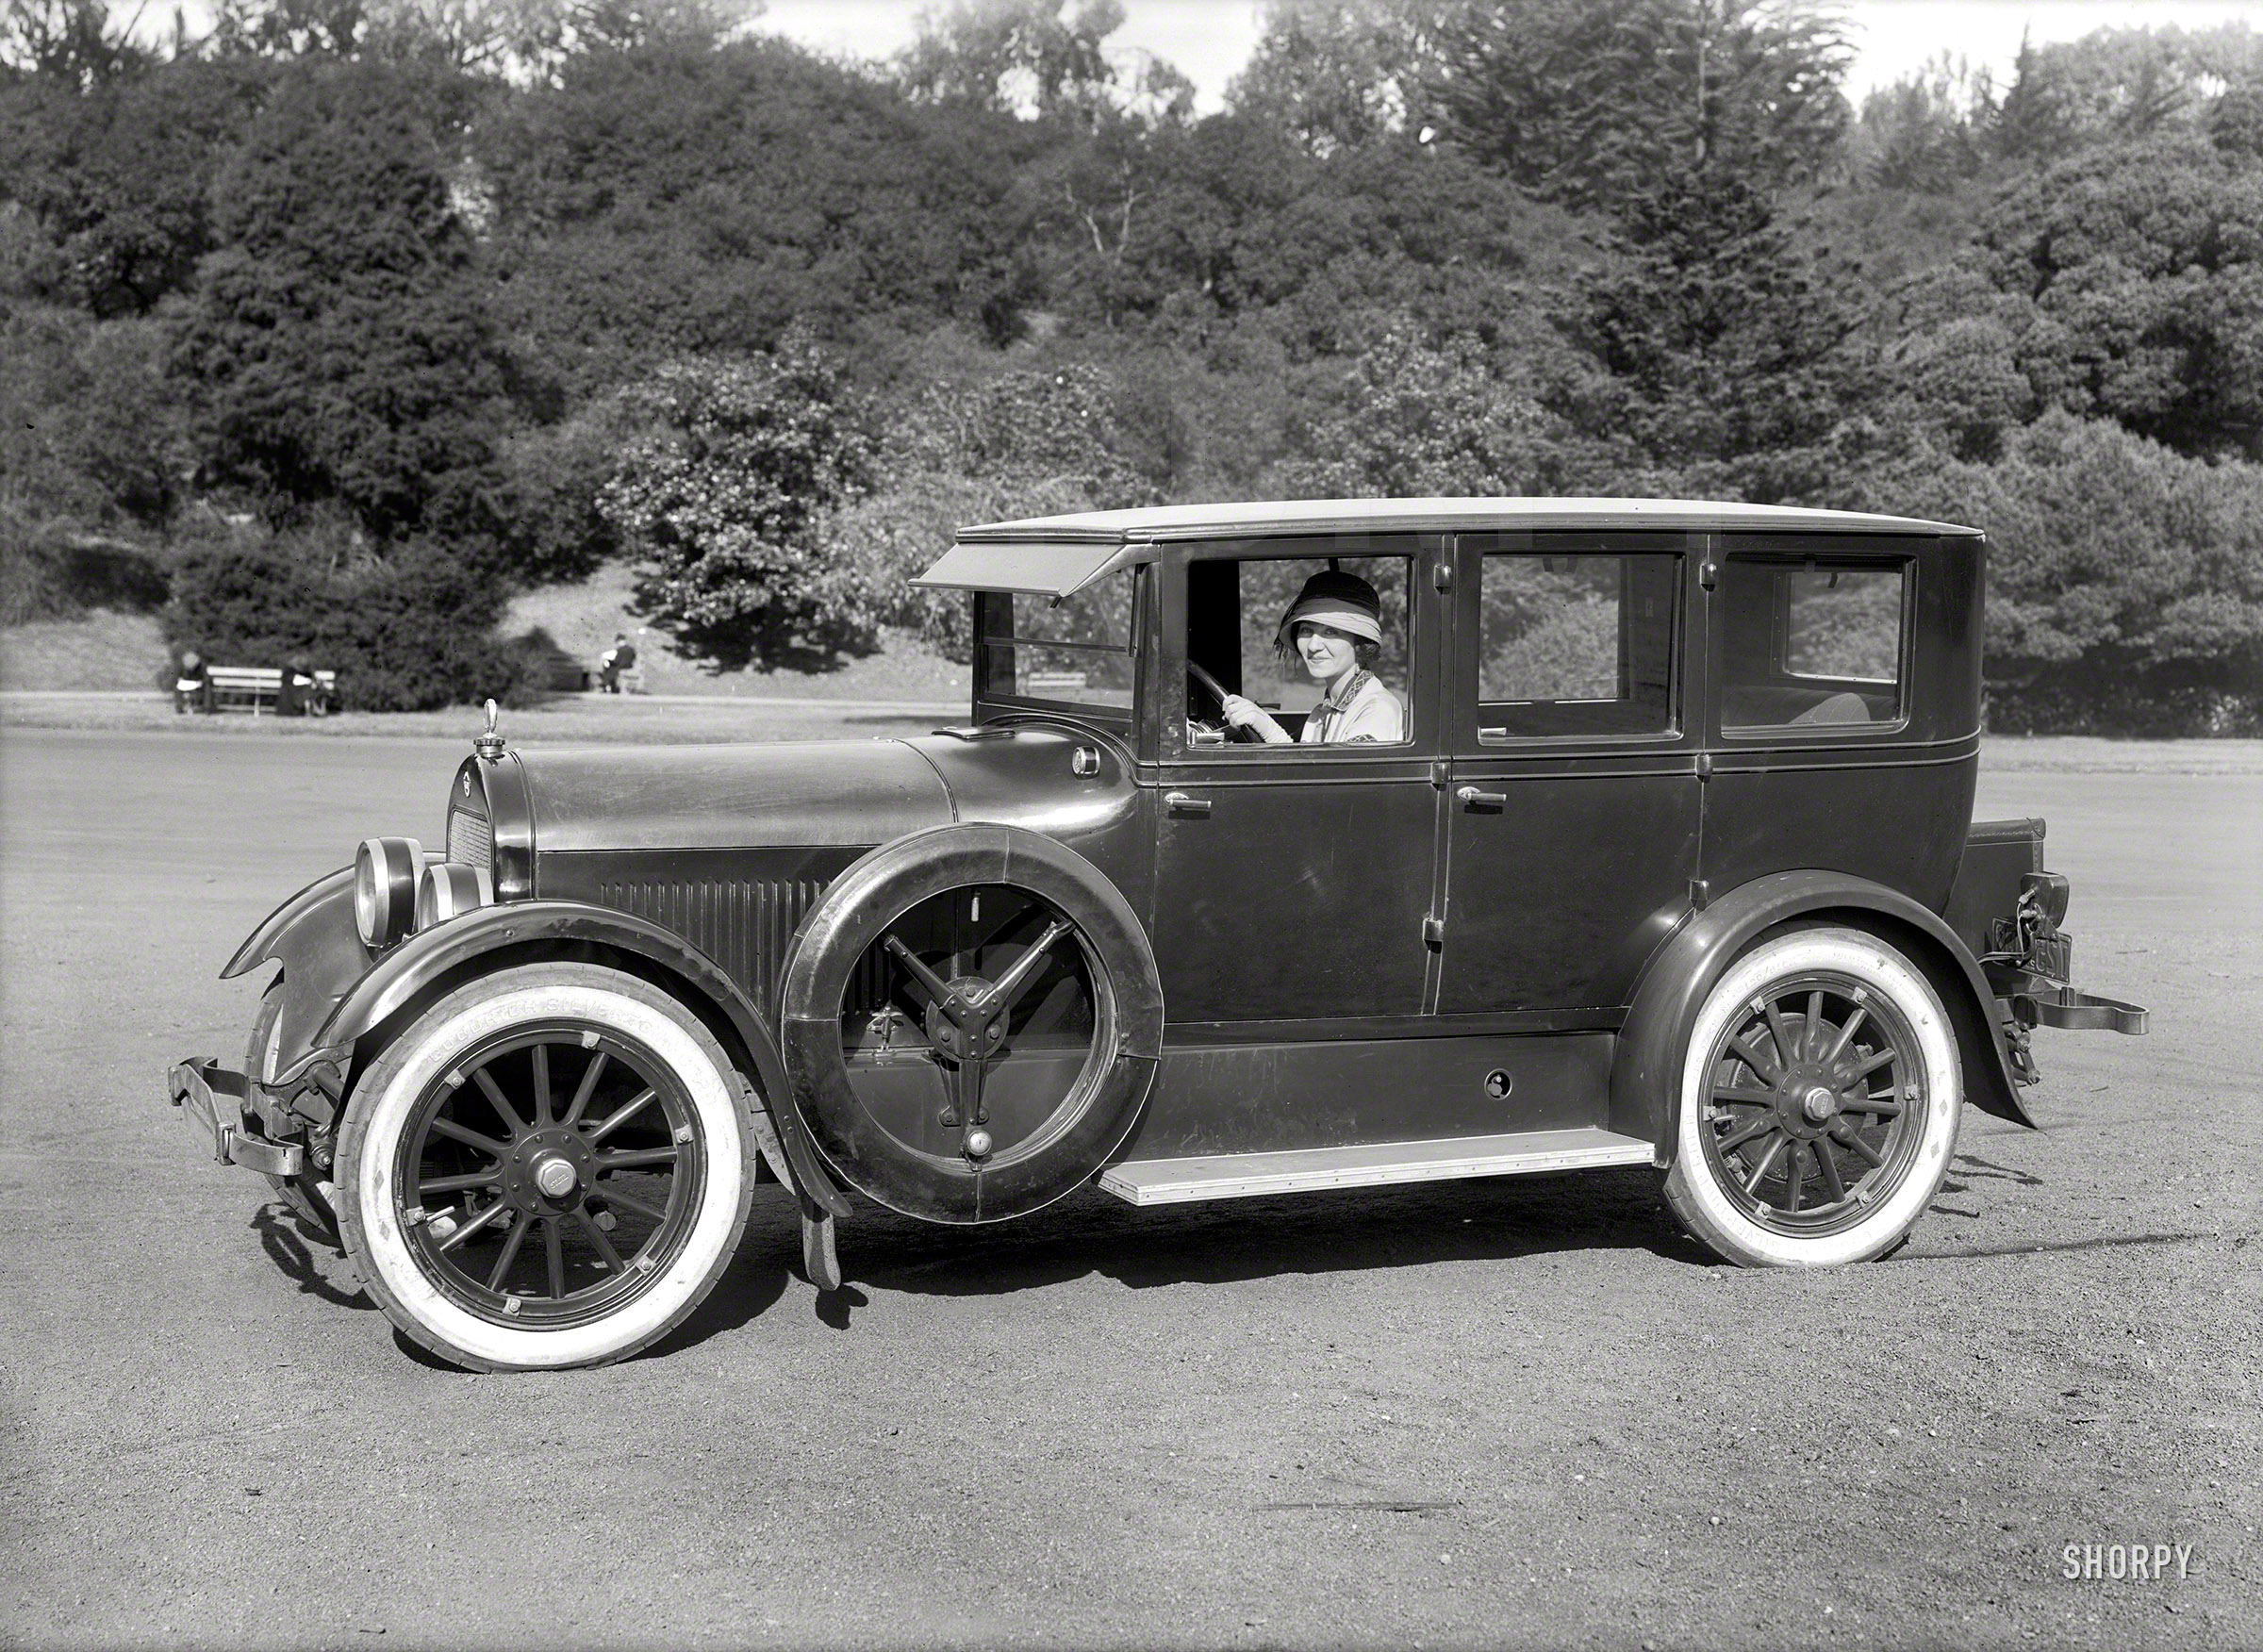 San Francisco, 1923. "Stutz sedan in Golden Gate Park." Ready to motor forth into the Jazz Age. 5x7 glass negative by Christopher Helin. View full size.